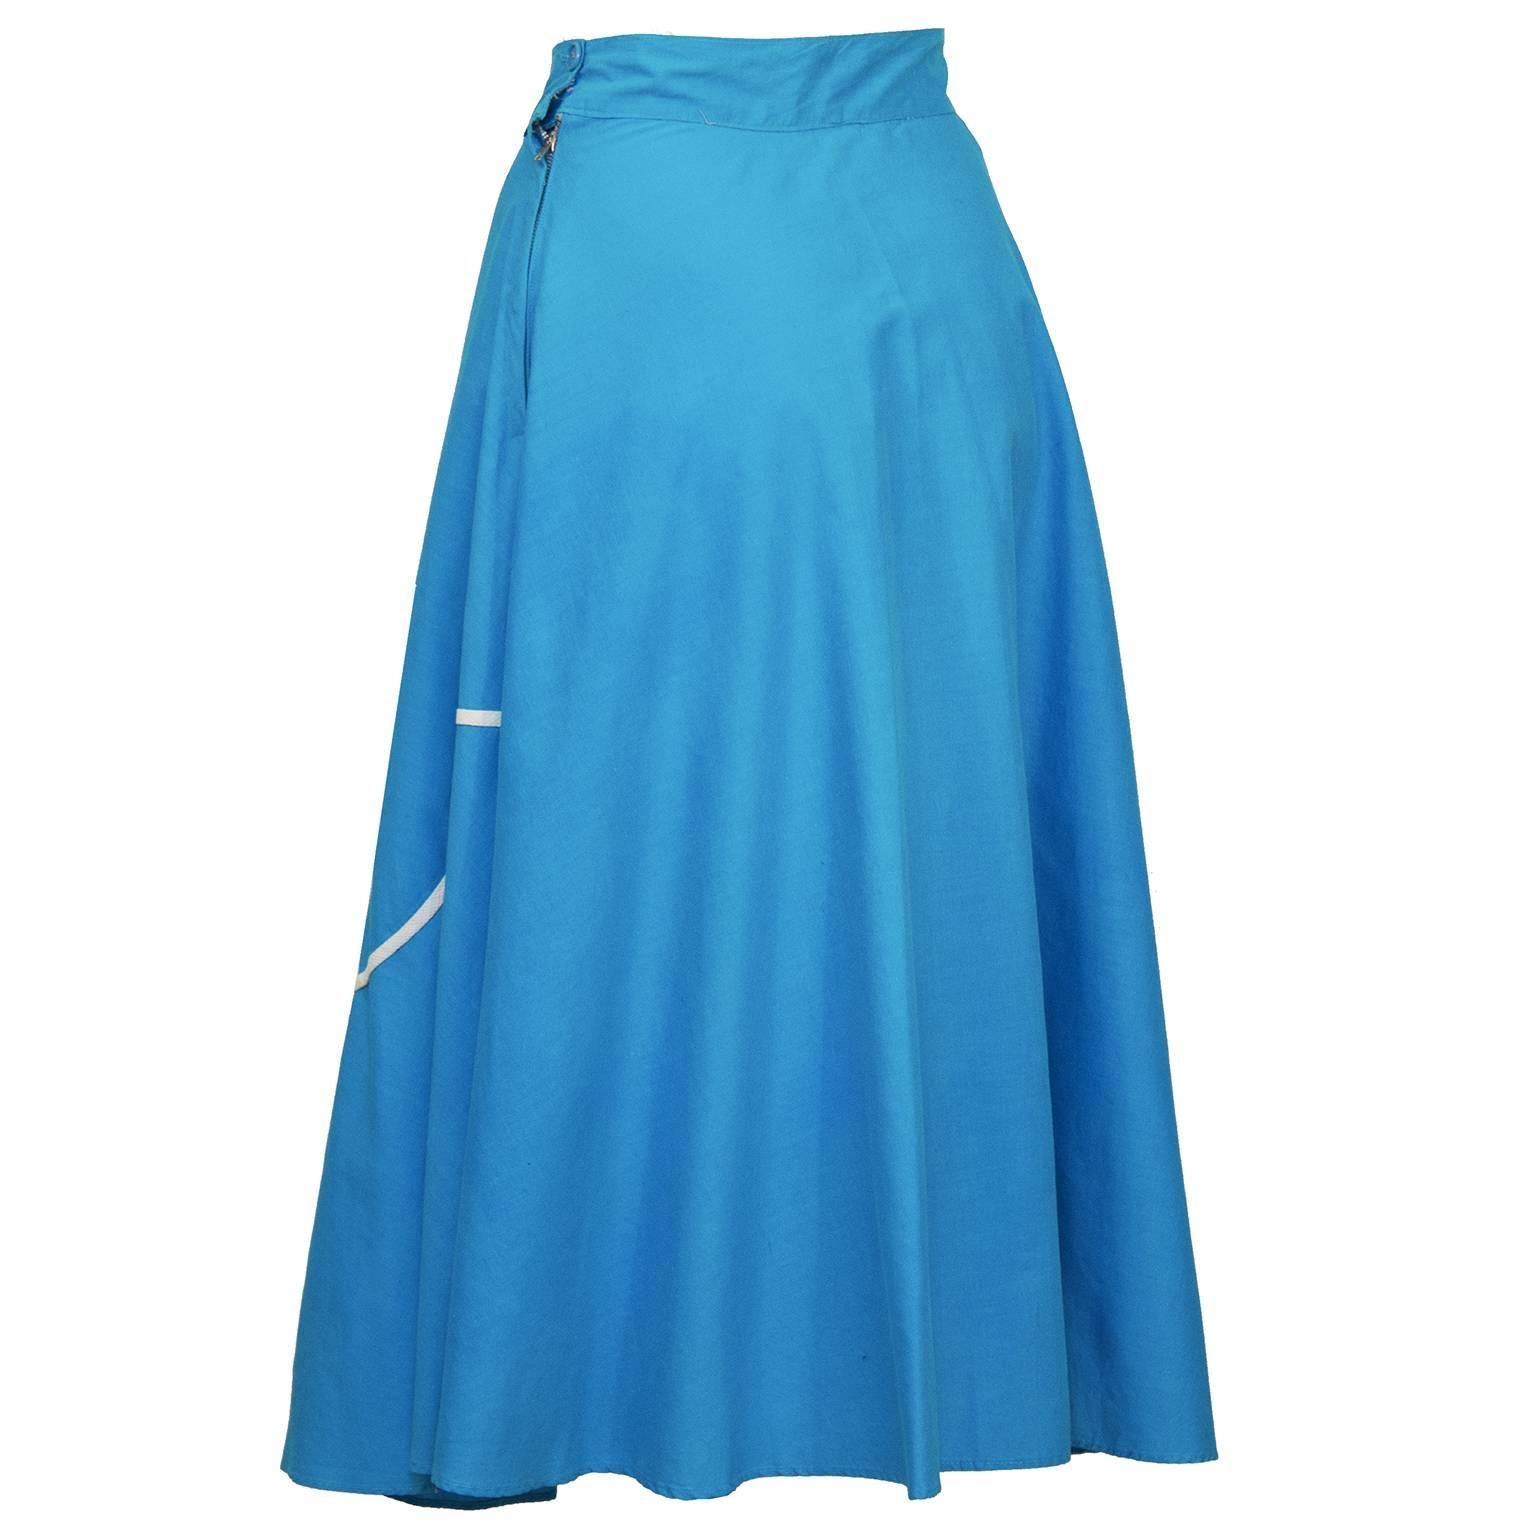 Blue 1950's Turquoise Circle Skirt with Tulip Applique